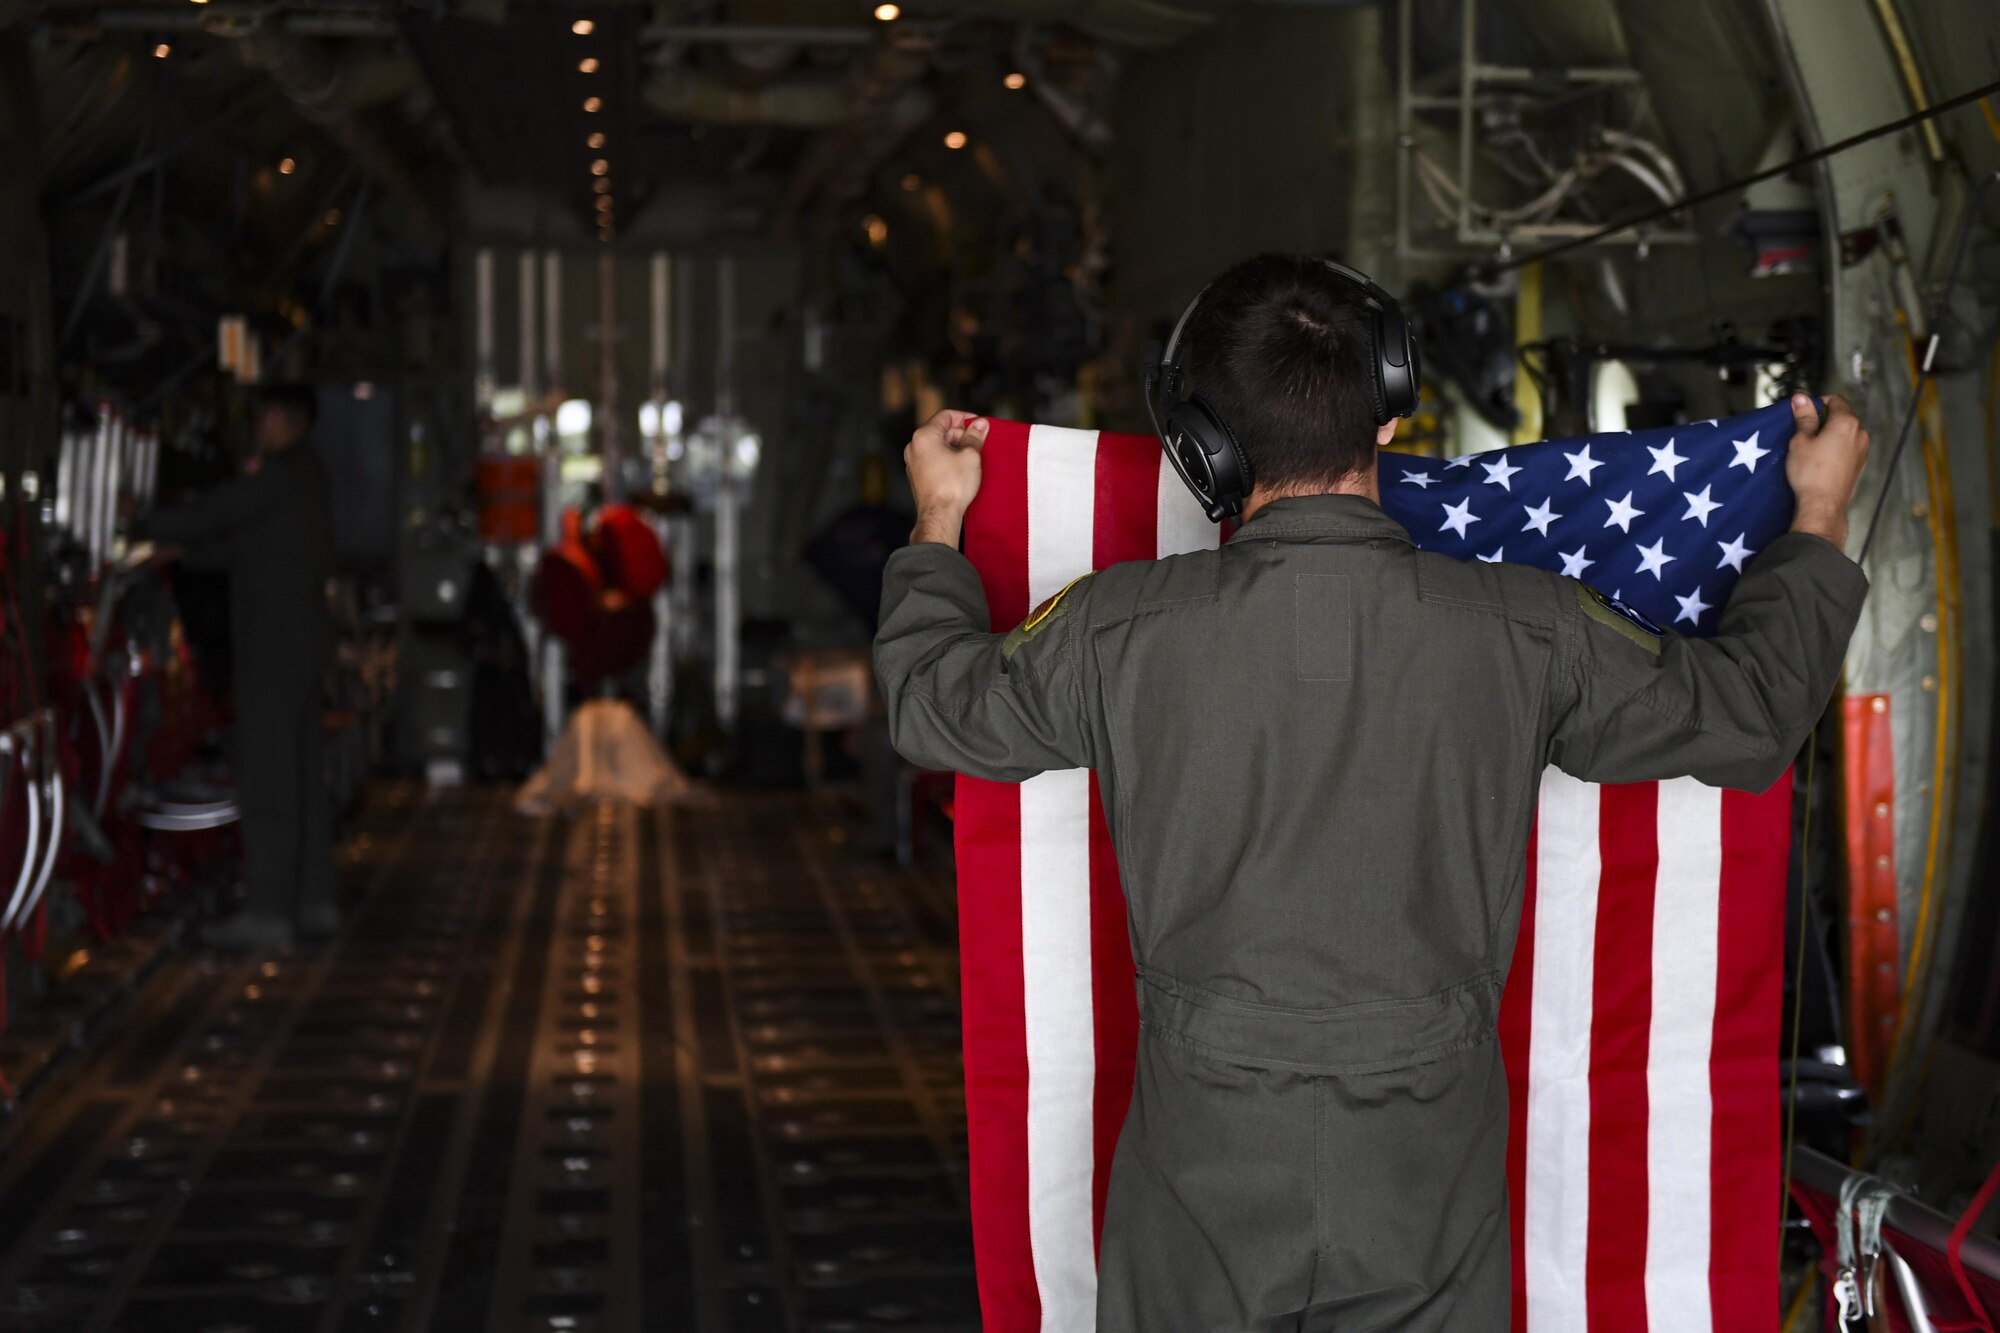 U.S. Air Force Senior Airman Matthew Gee, 37th Airlift Squadron aircraft loadmaster, hangs the American flag inside a C-130J Super Hercules assigned to Ramstein Air Base, Germany, before taking off at Cherbourg-Maupertus Airport, France, May 30, 2017. This event commemorates the 73rd anniversary of D-Day, the largest multi-national amphibious landing and operational military airdrop in history, and highlights the U.S.' steadfast commitment to European allies and partners. Overall, approximately 400 U.S. service members from units in Europe and the U.S. are participating in ceremonial D-Day 73 events from May 31-June 7, 2017. (U.S. Air Force photo by Senior Airman Devin Boyer)